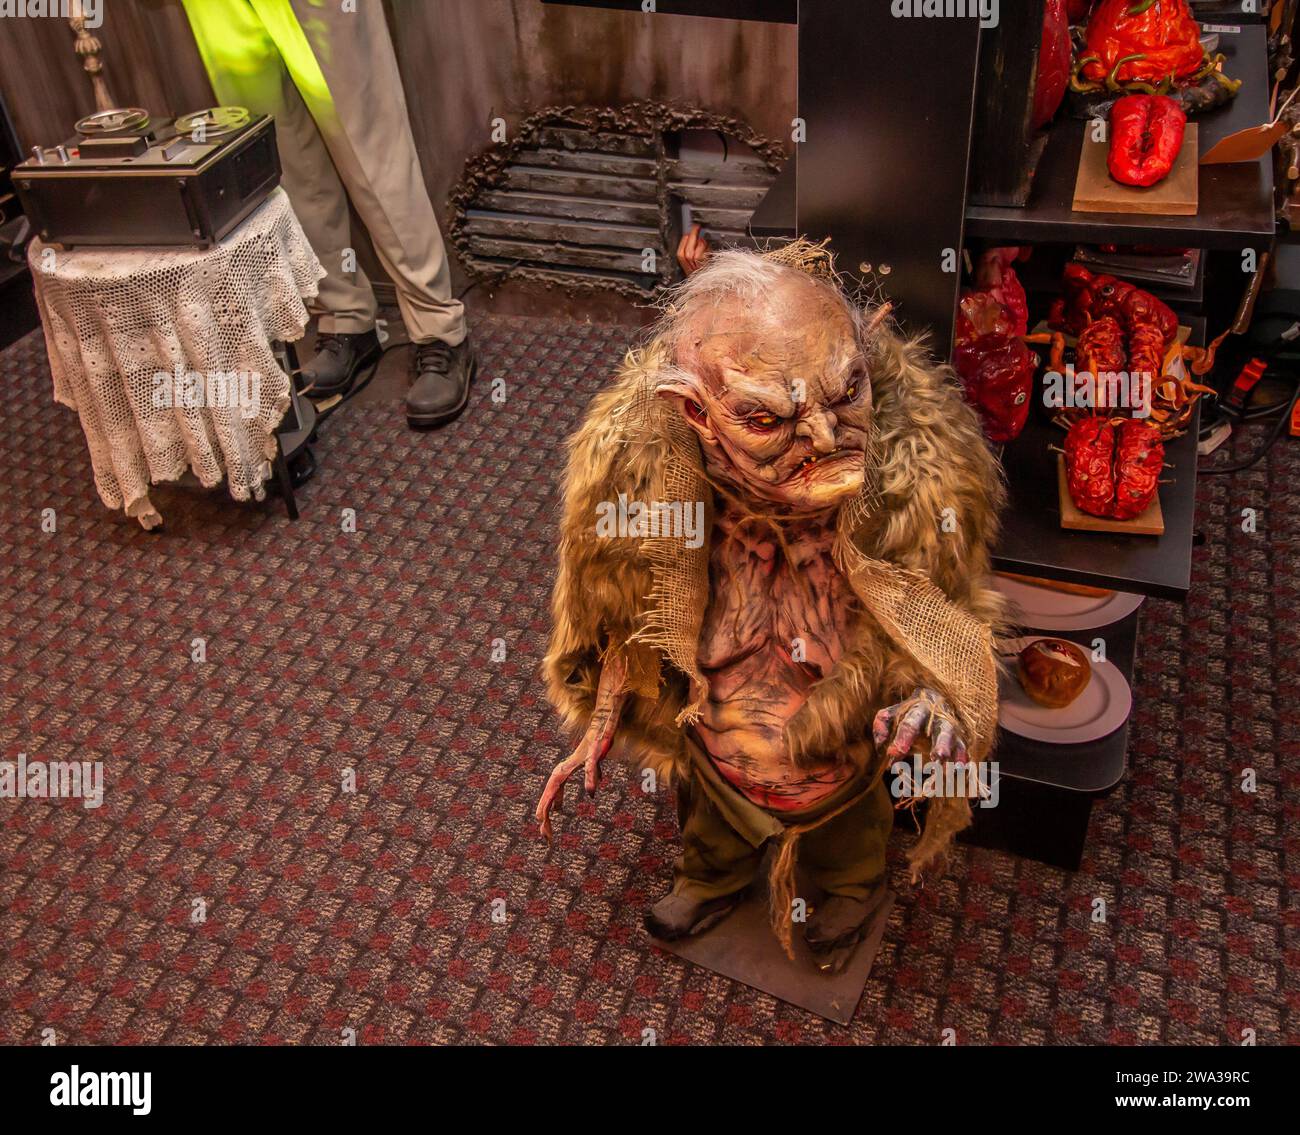 Scary Creature On Display At Horror Shop Stock Photo